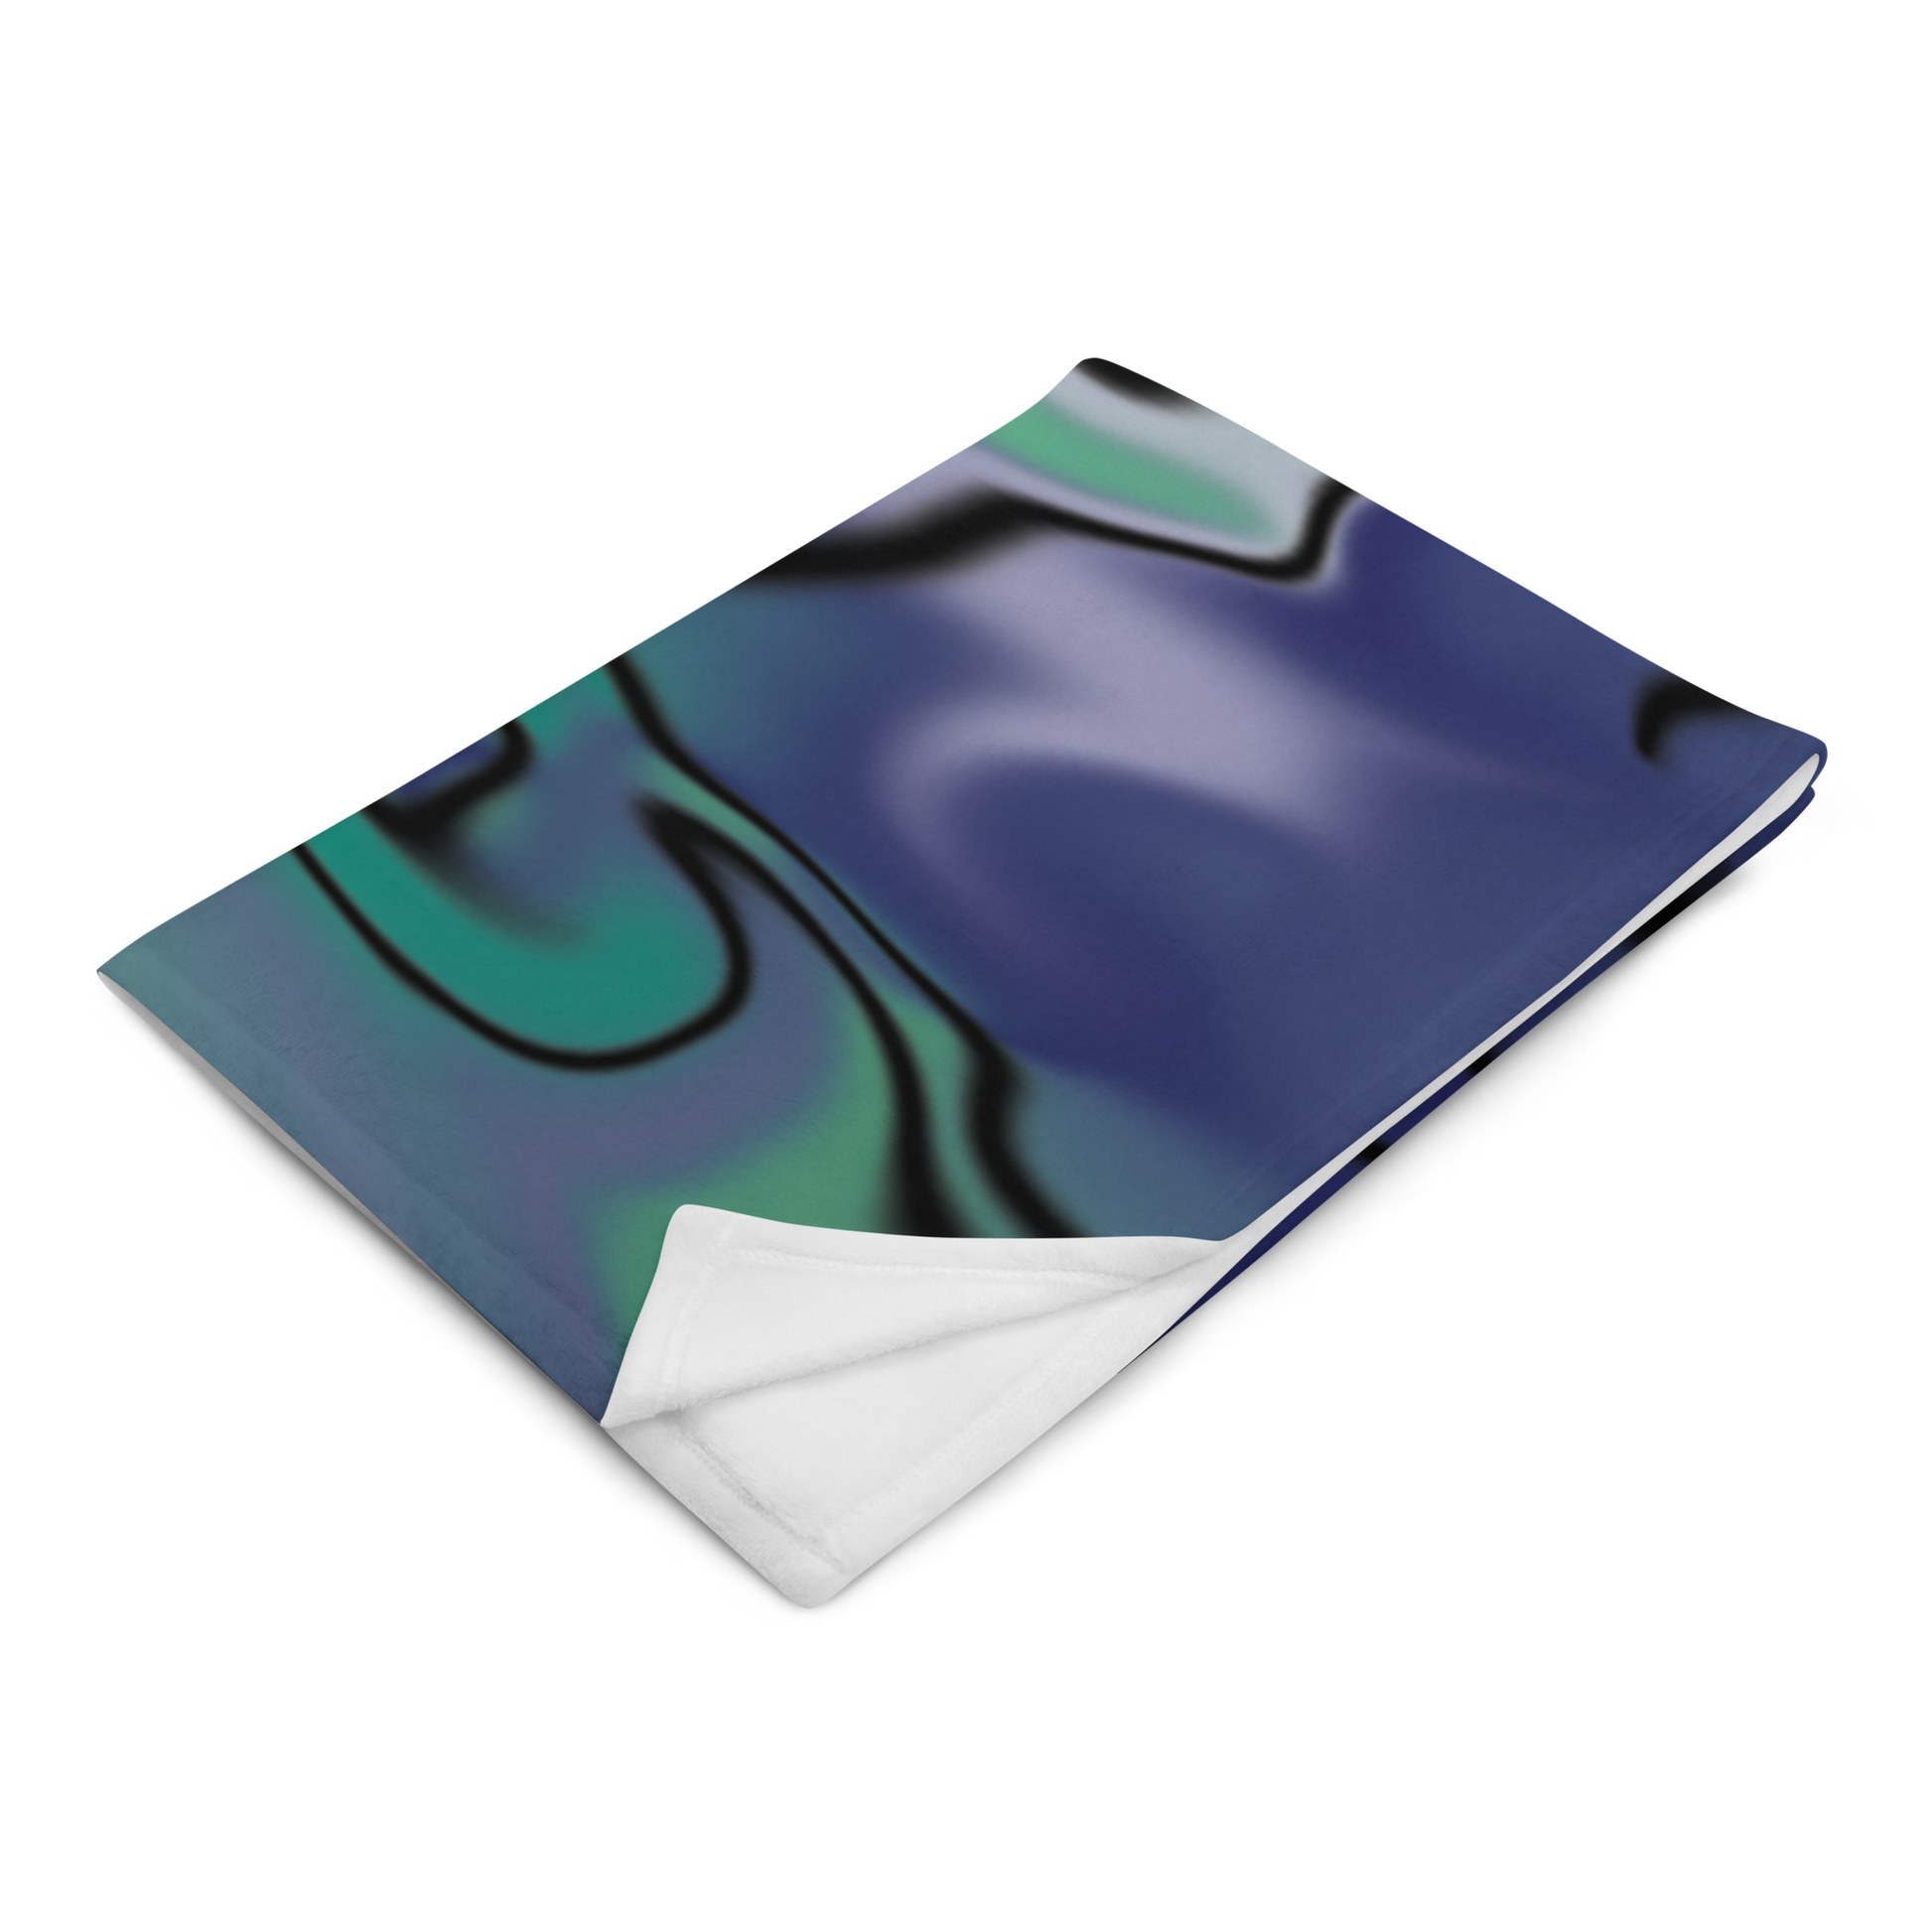 Masquerade BeSculpt Abstract Art Throw Blanket Reversed Image